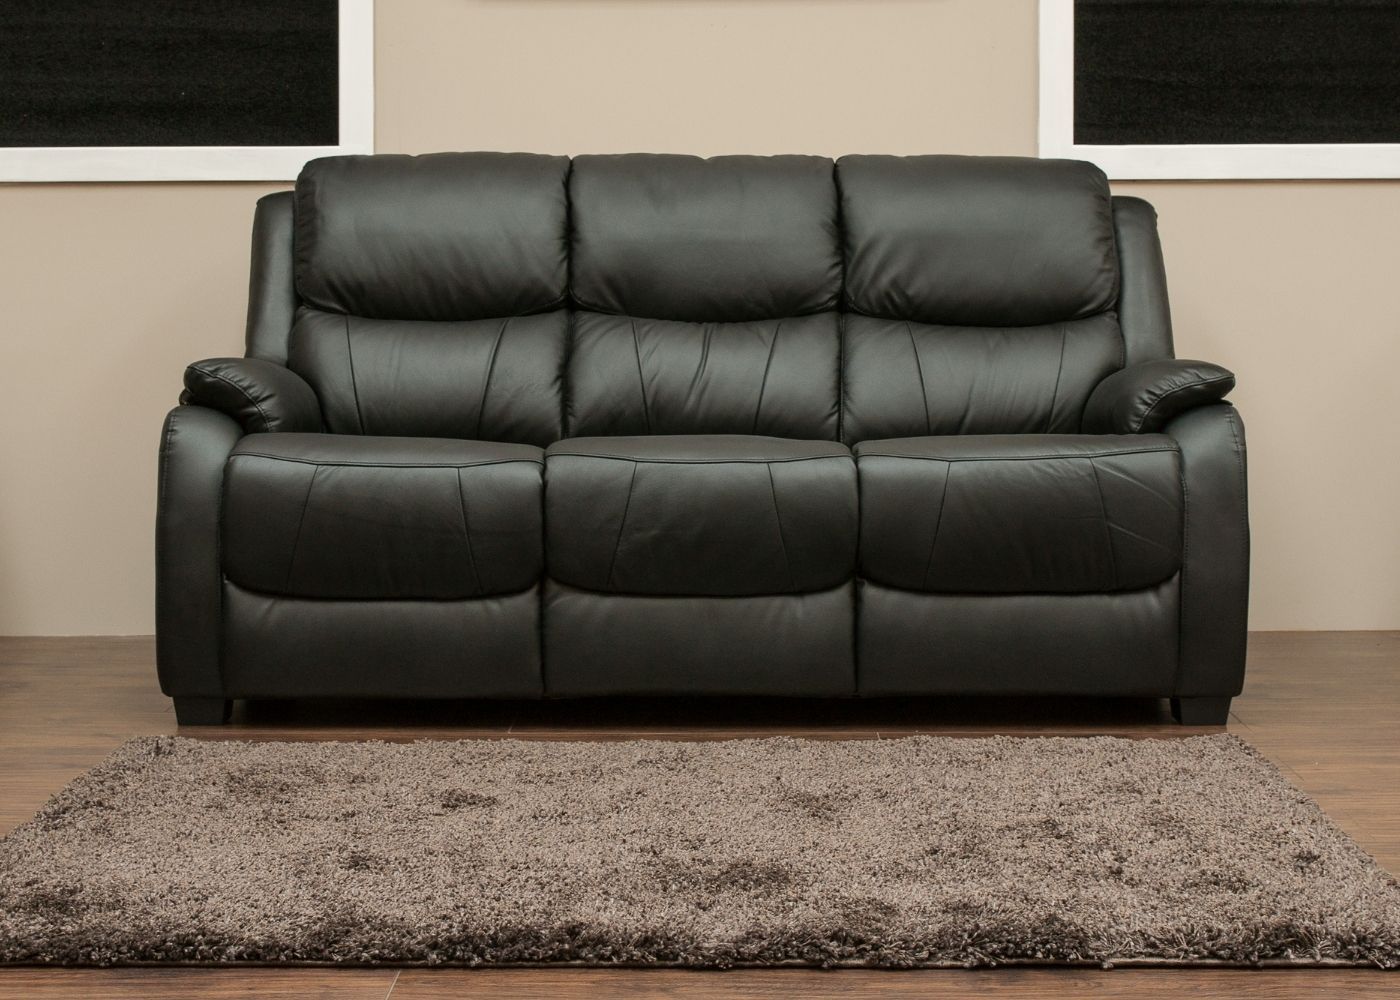 Parker Leather Sofa Range By House